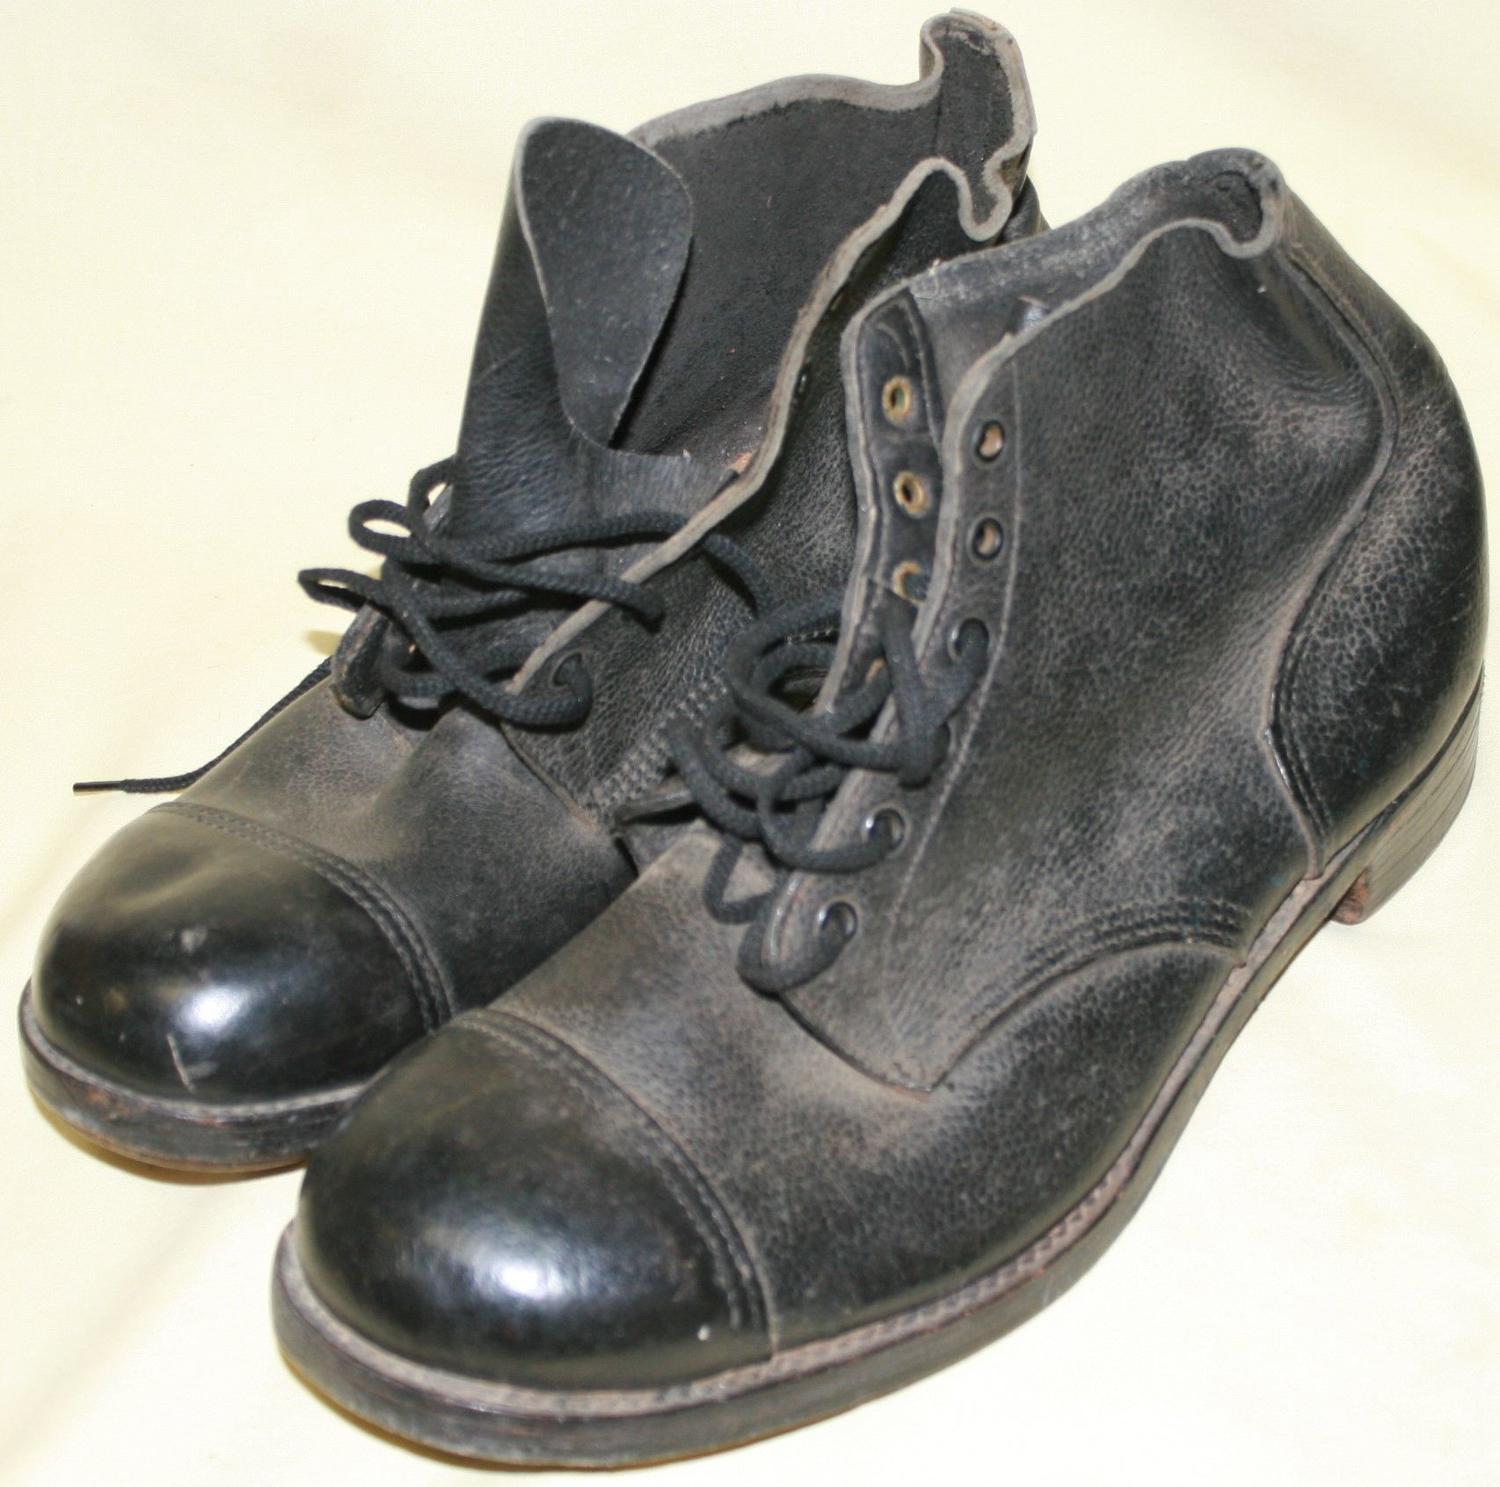 A PAIR OF SIZE 12 WWII AMMO BOOTS